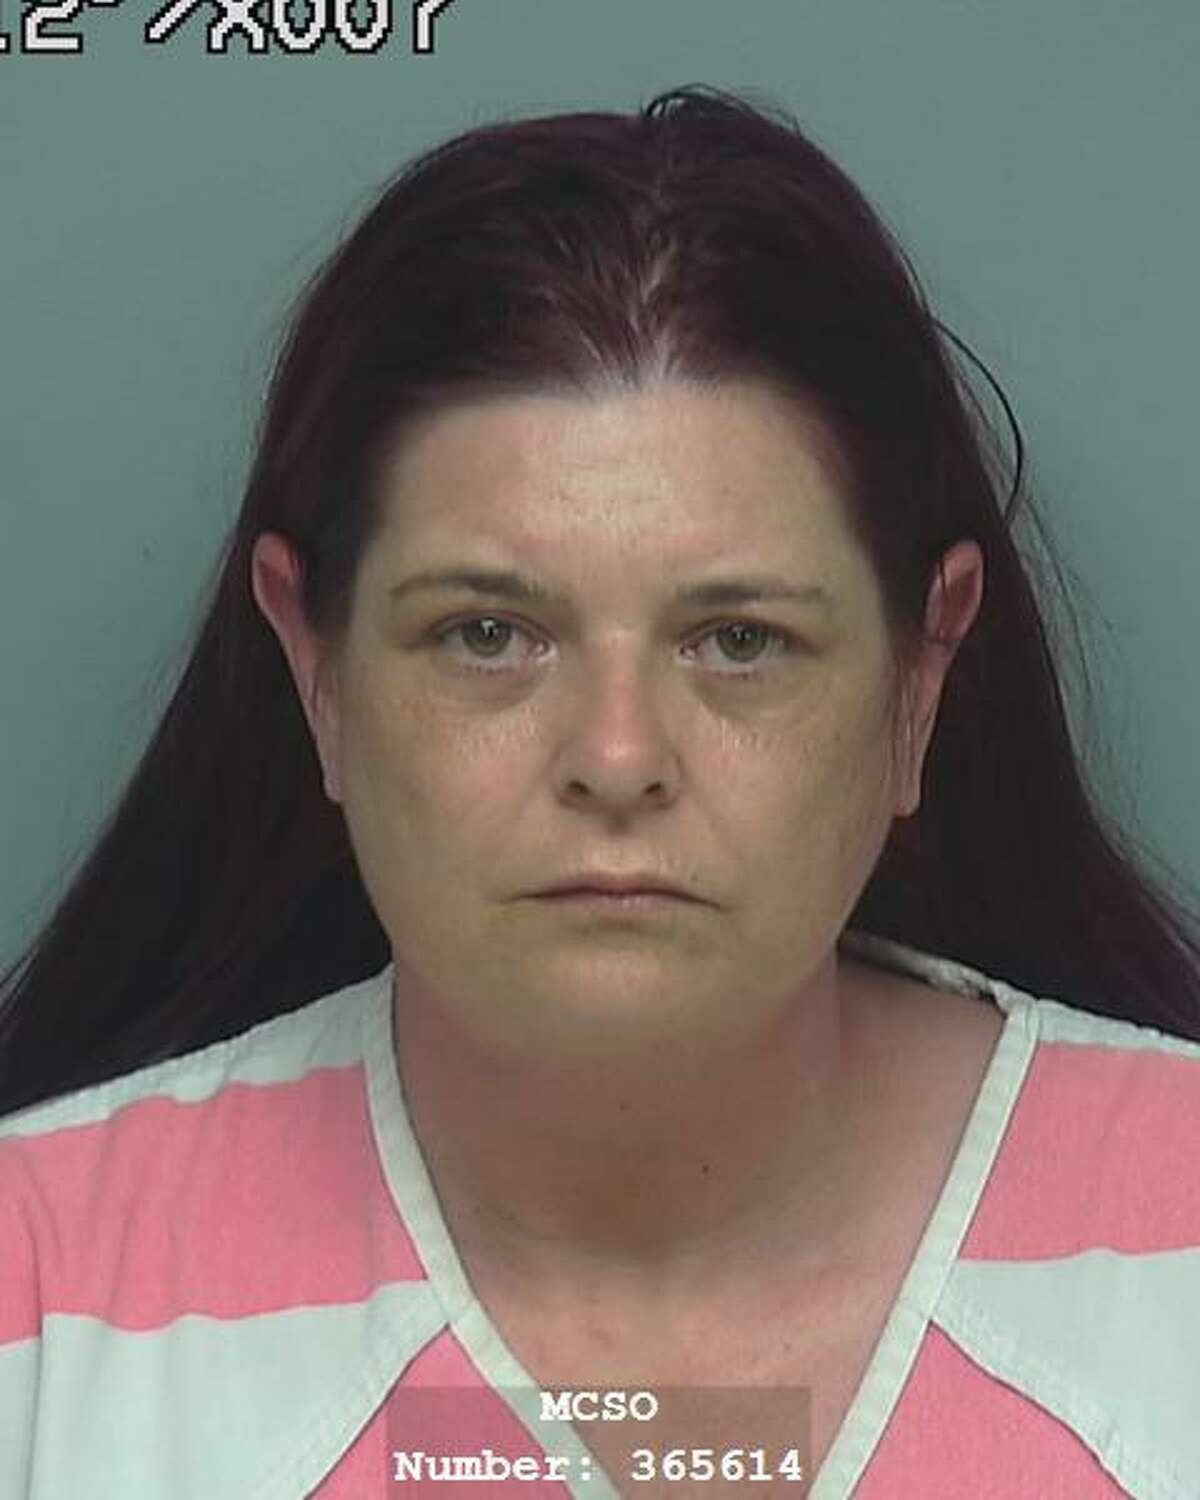 April Lynn Chadwick, 43, of Conroe, is being charged with prohibited sexual conduct with a descendant, a second-degree felony